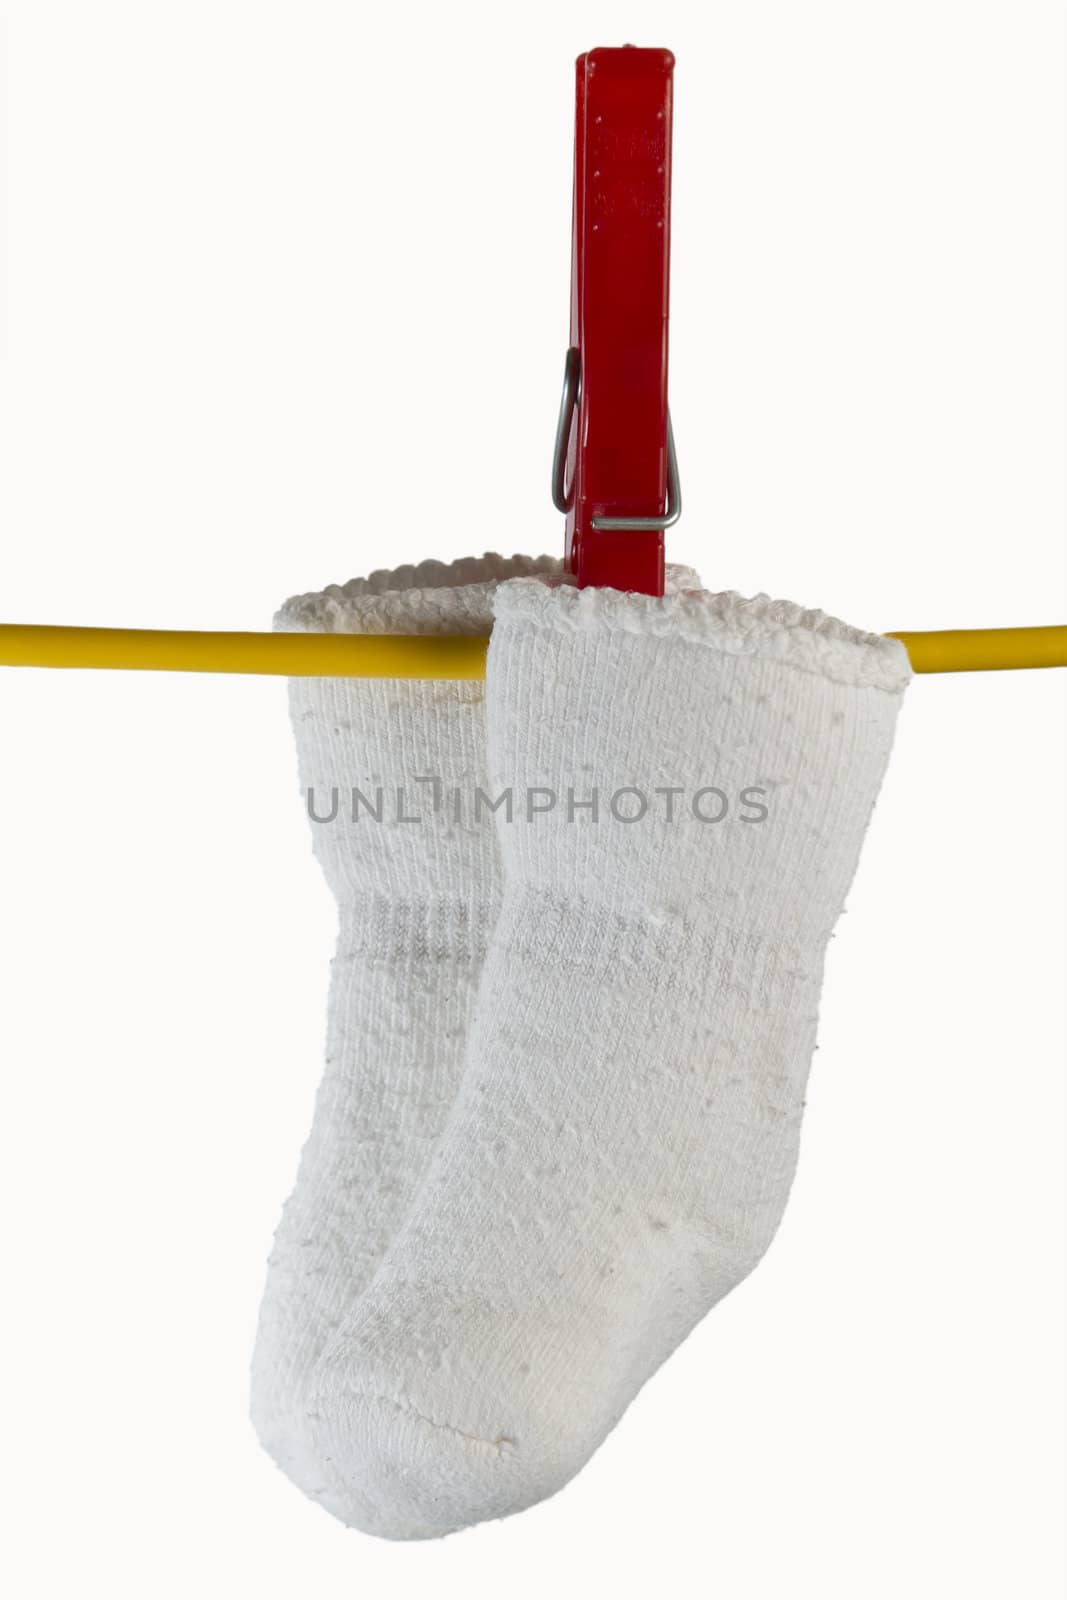 two white baby sox on yellow clothesline with clothespin in white background